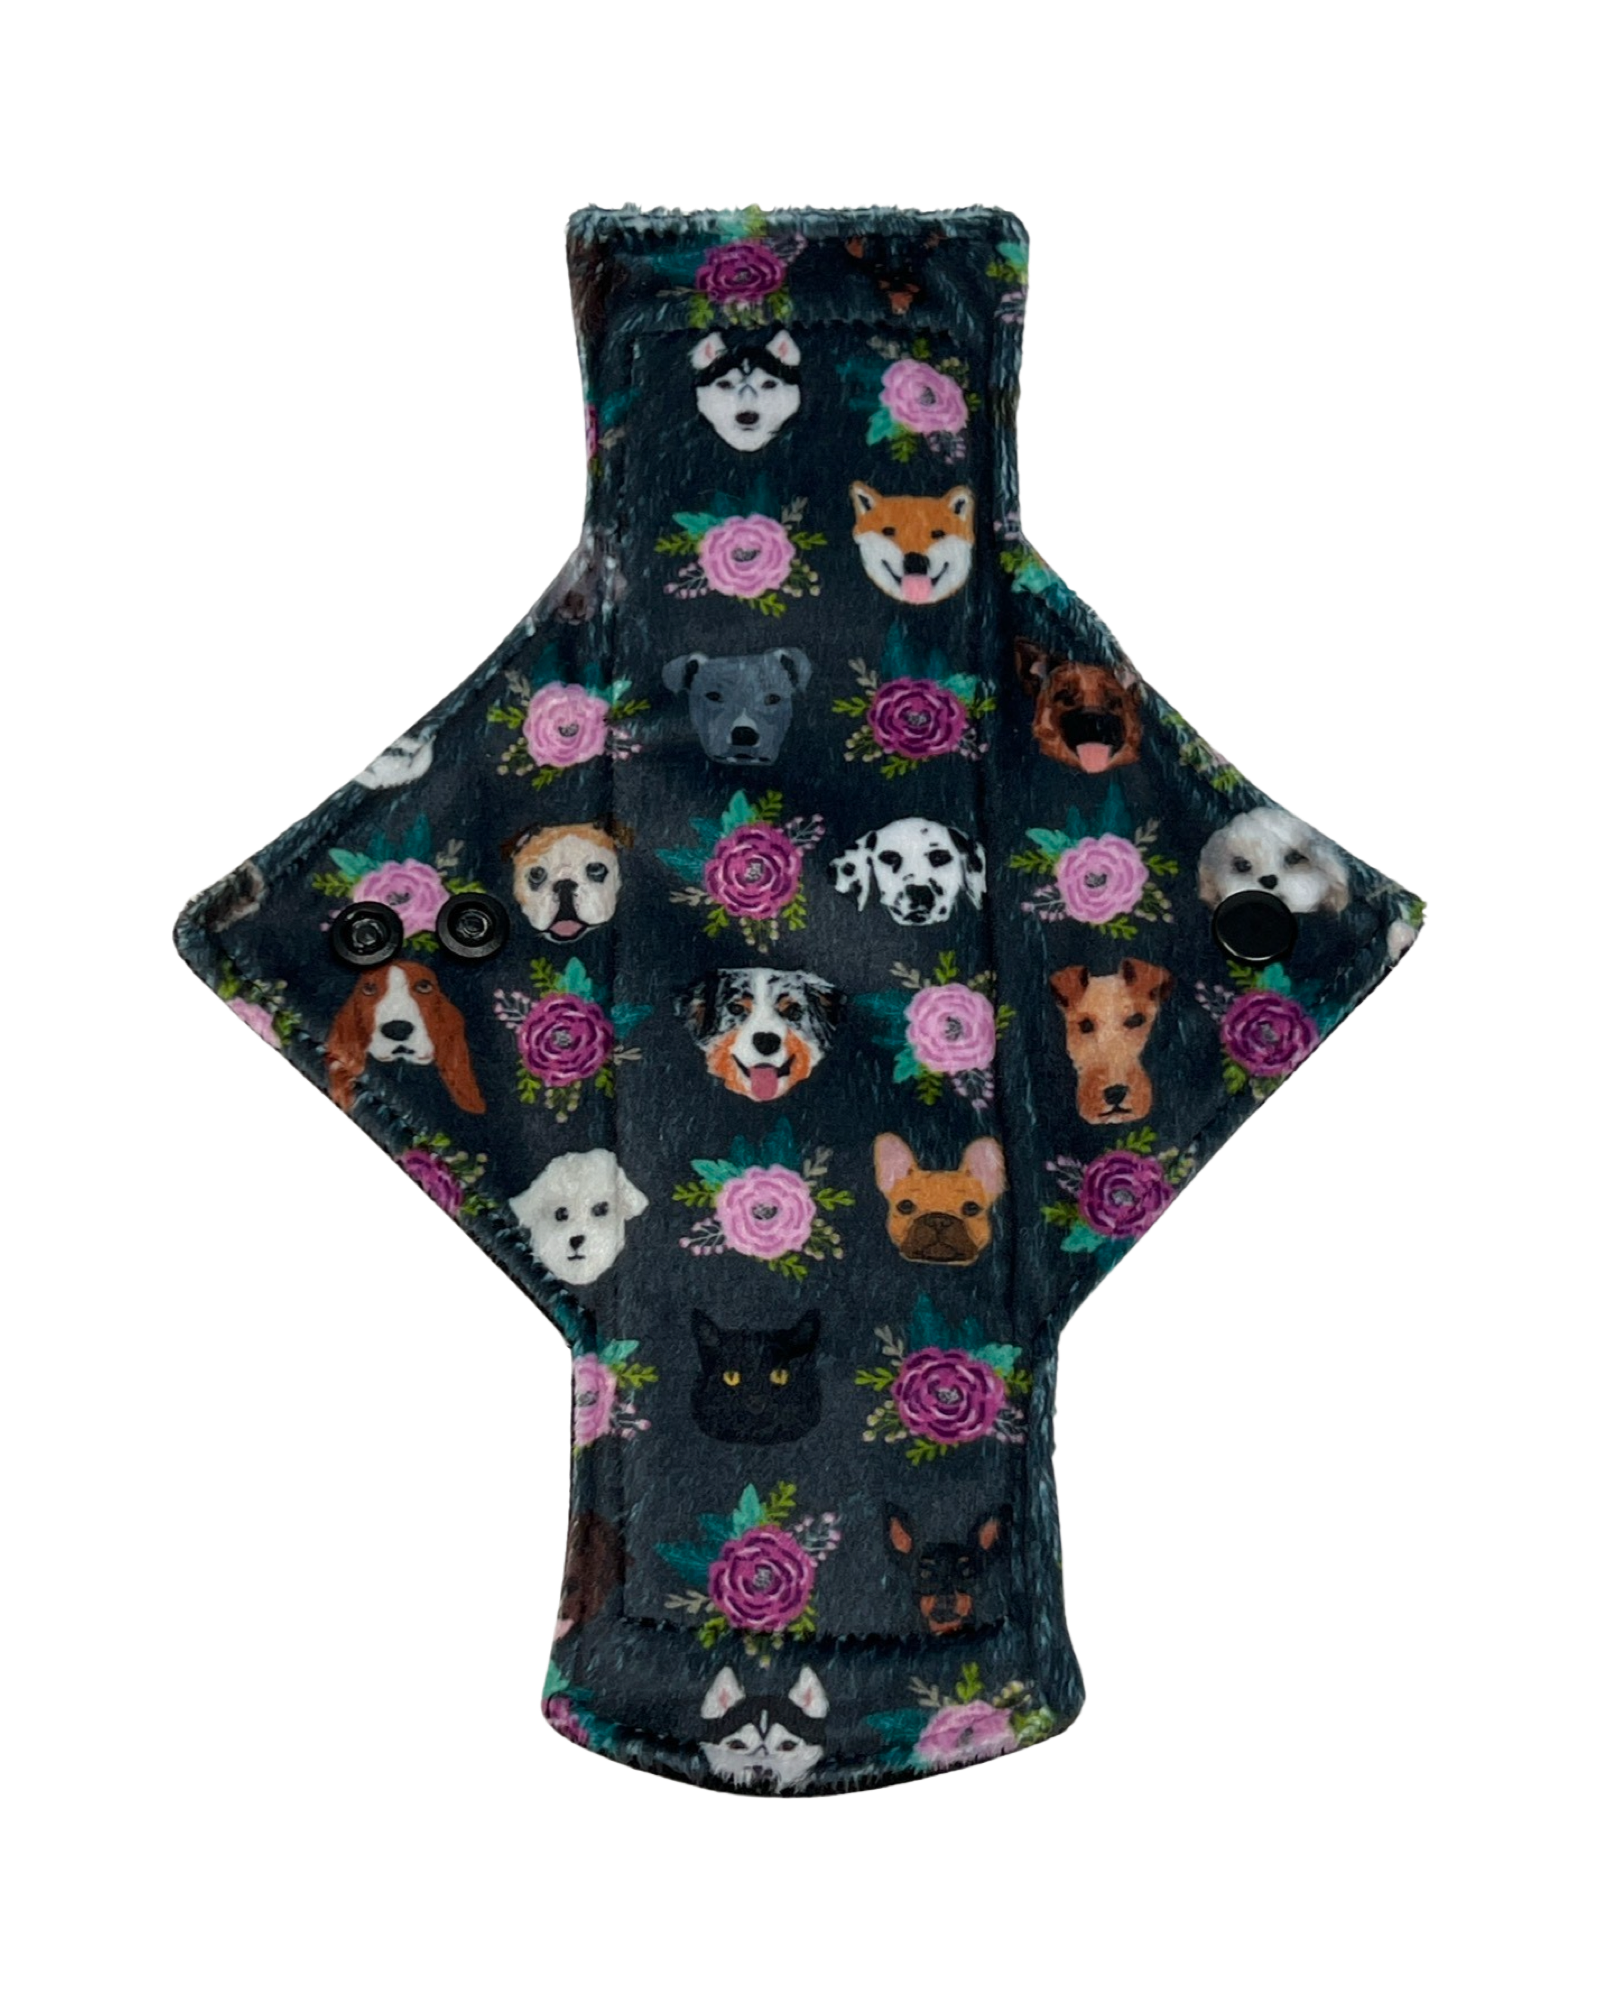 Stash Dash Event 2023 - Backed with Softshell Fleece Puppy Faces Limited Edition Minky Single Heavy Flow Day Pad - Tree Hugger Cloth Pads